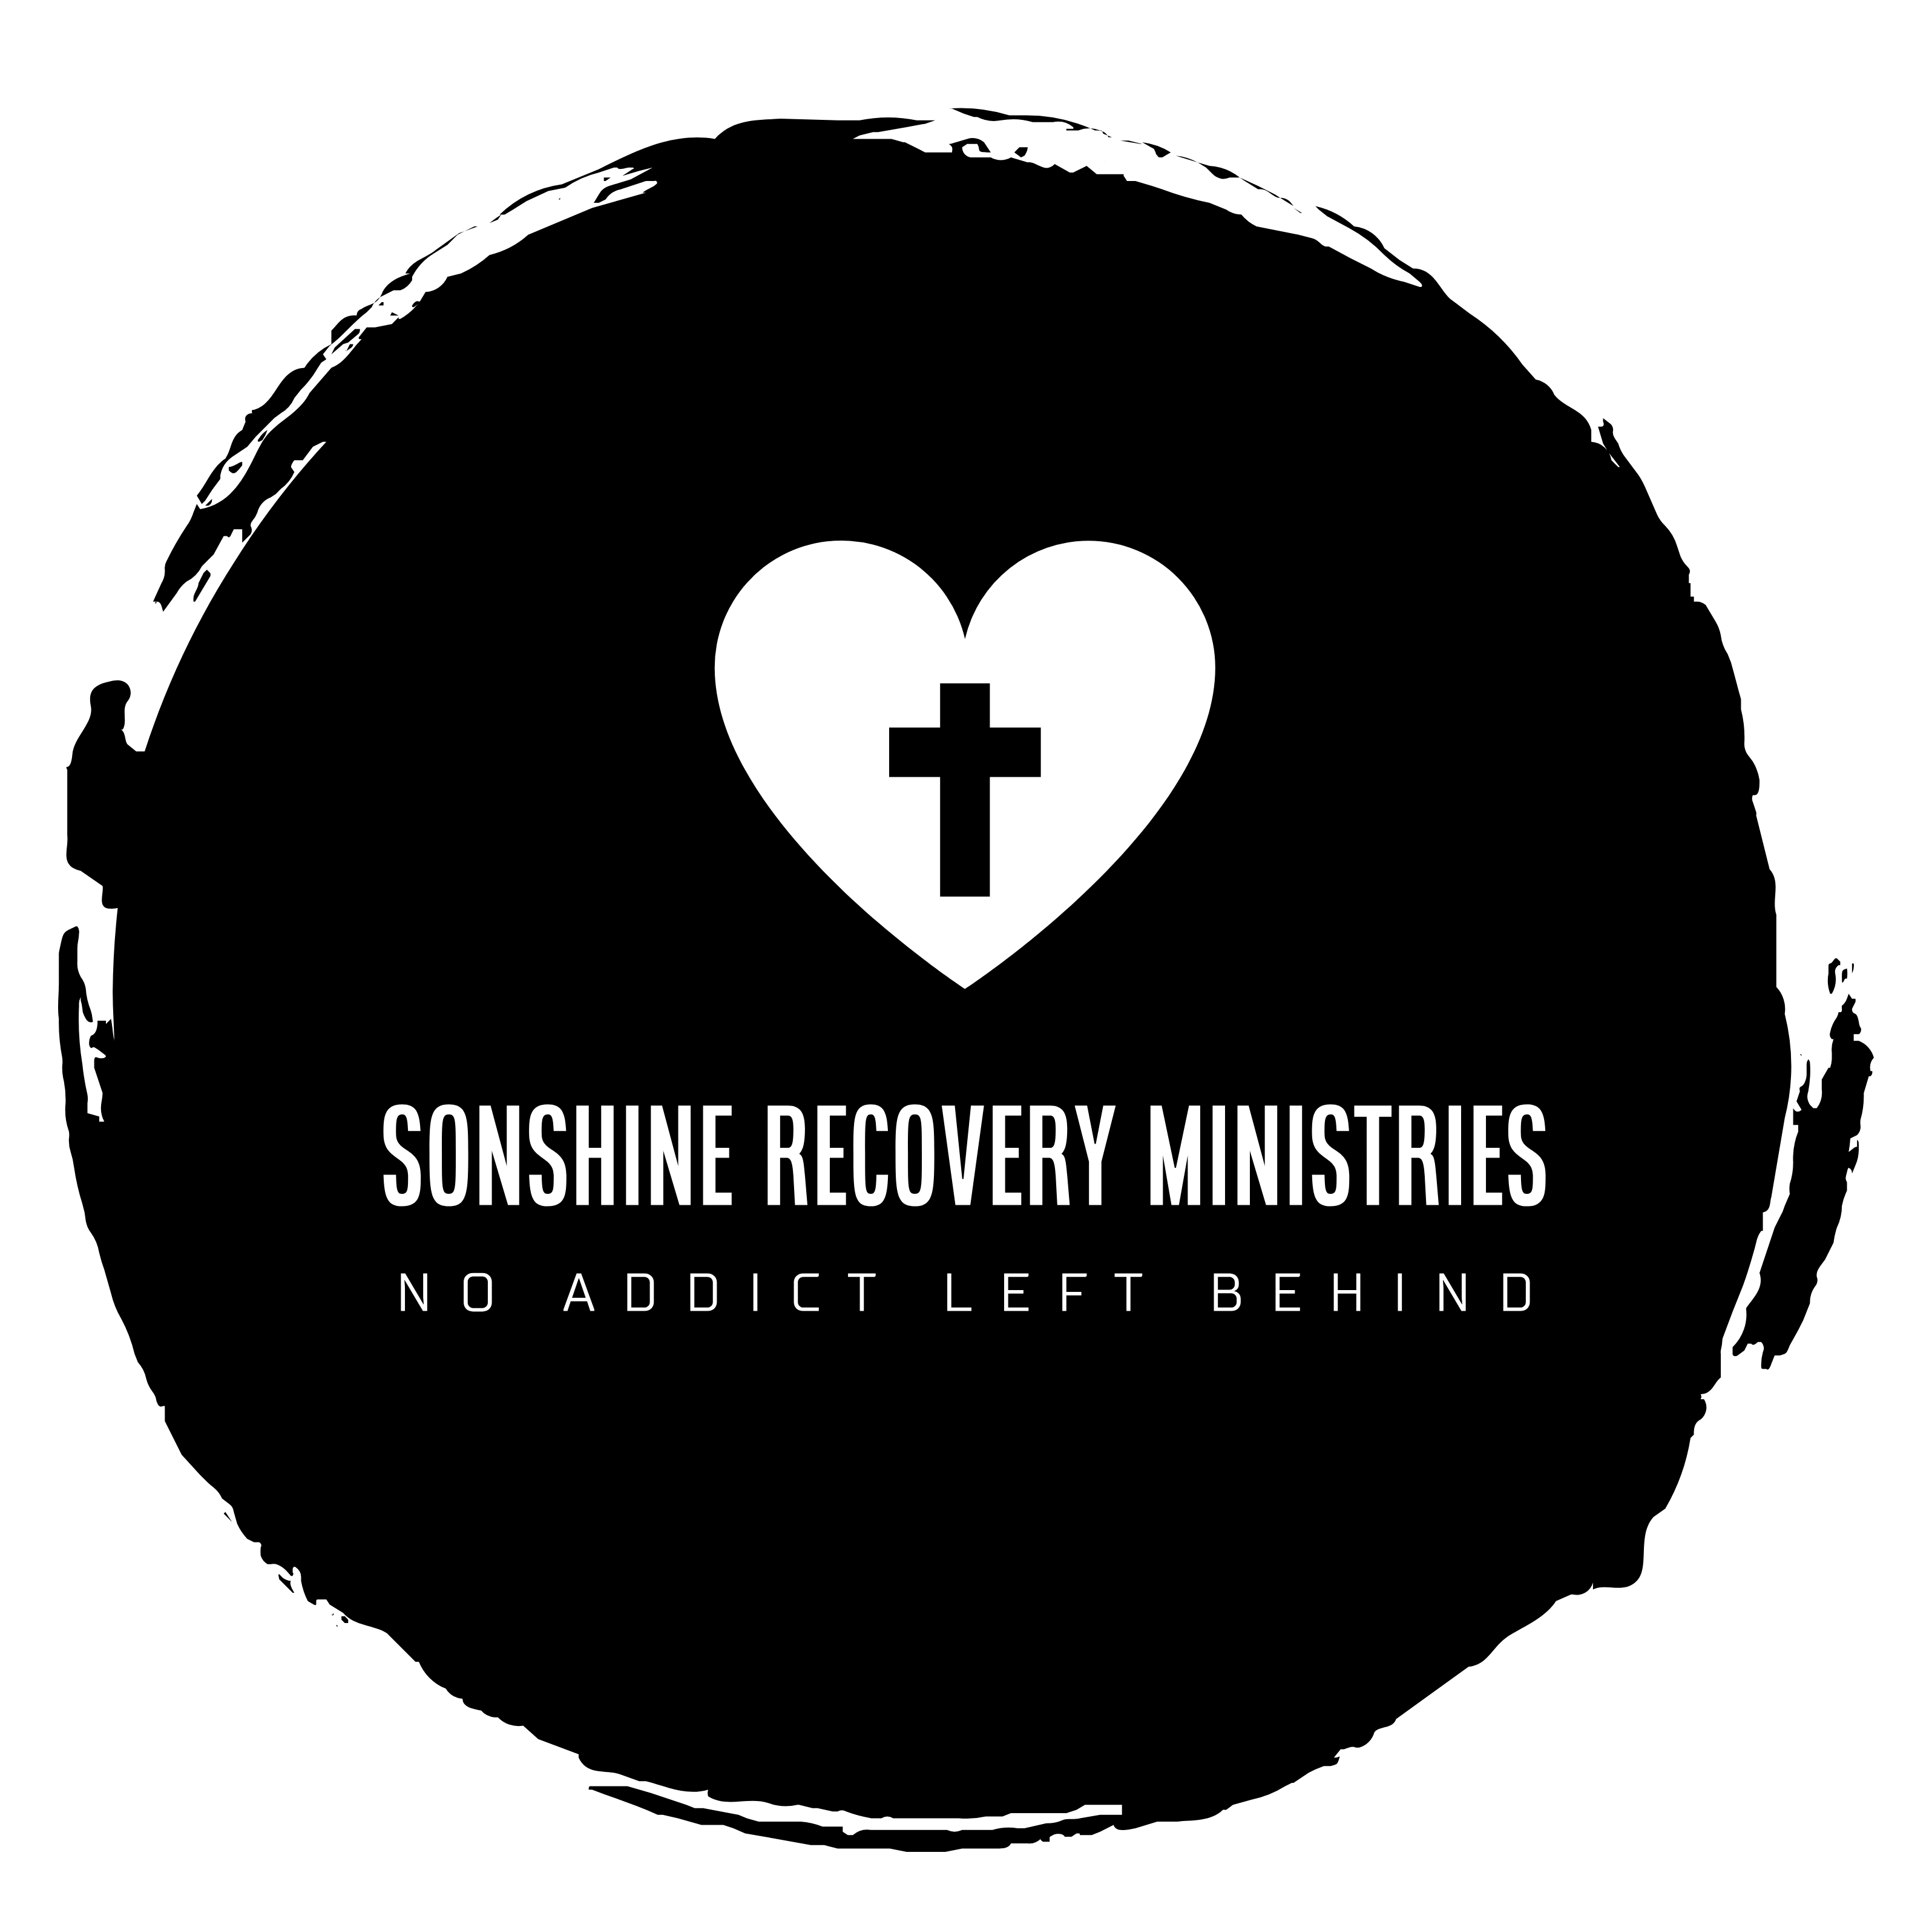 Sonshine Recovery Ministries